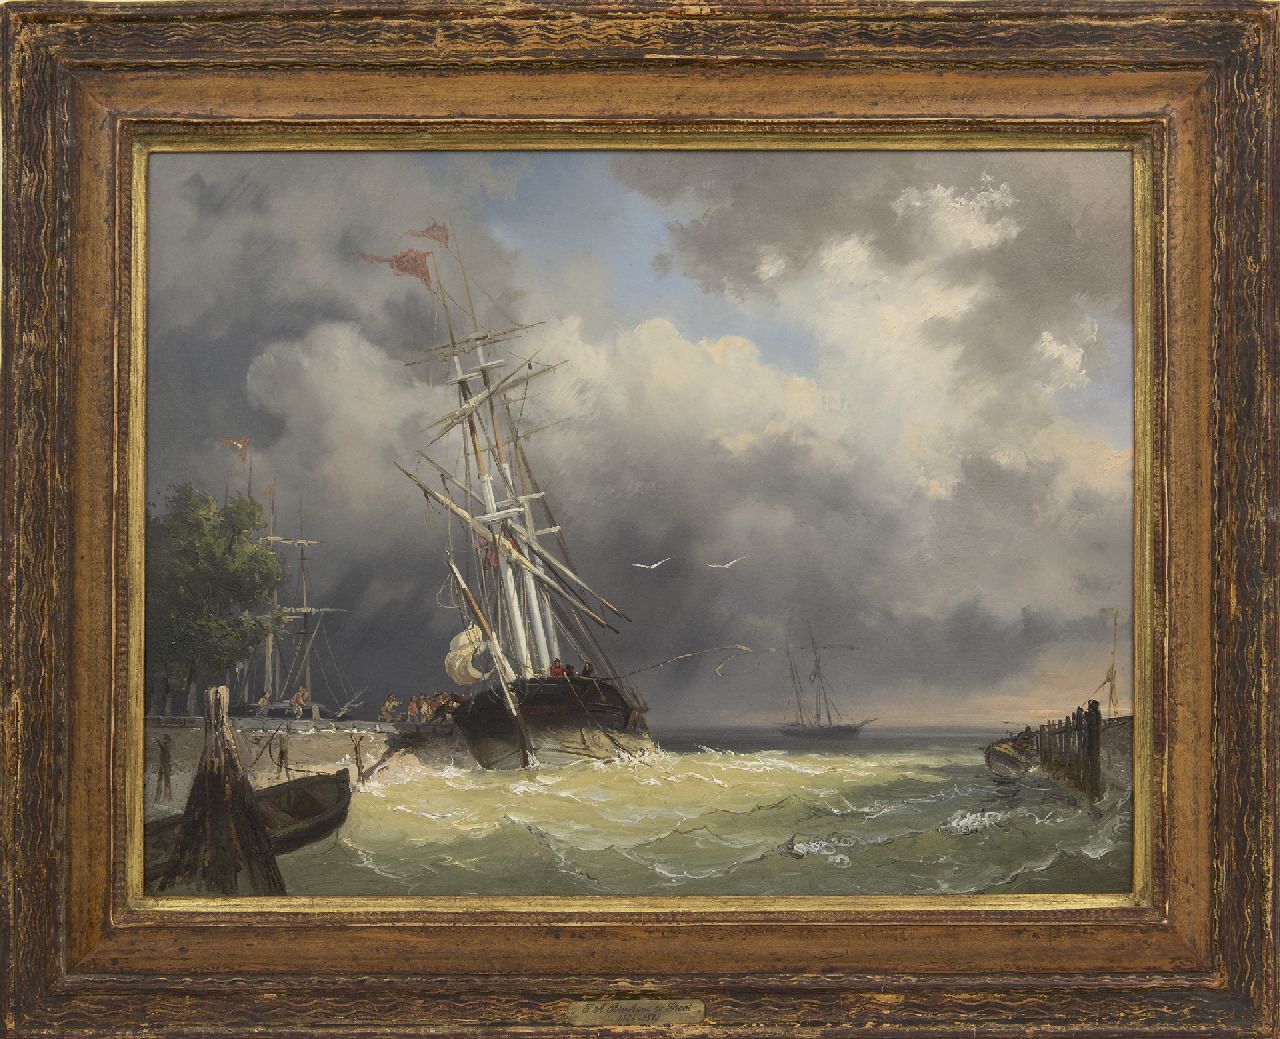 Breuhaus de Groot F.A.  | Frans Arnold Breuhaus de Groot | Paintings offered for sale | A threemaster entering the harbour in a storm, oil on panel 44.4 x 59.5 cm